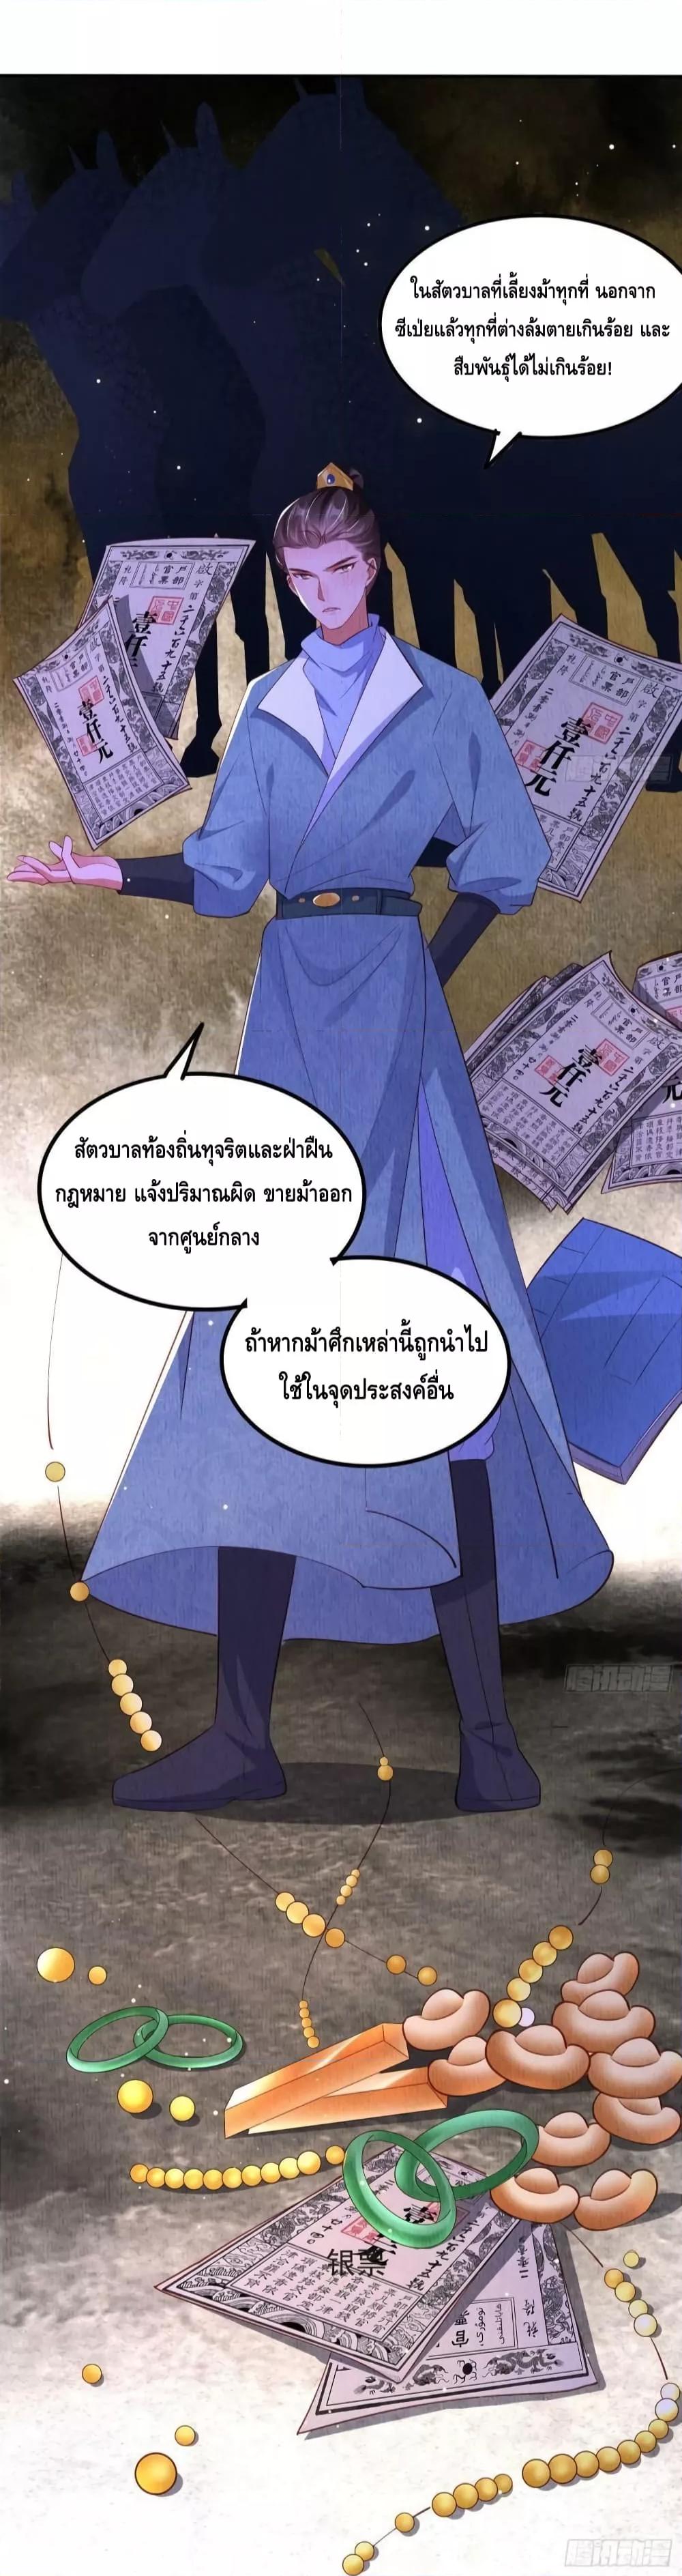 After I Bloom, a Hundred Flowers Will ill – ดอกไม้นับ ตอนที่ 53 (8)